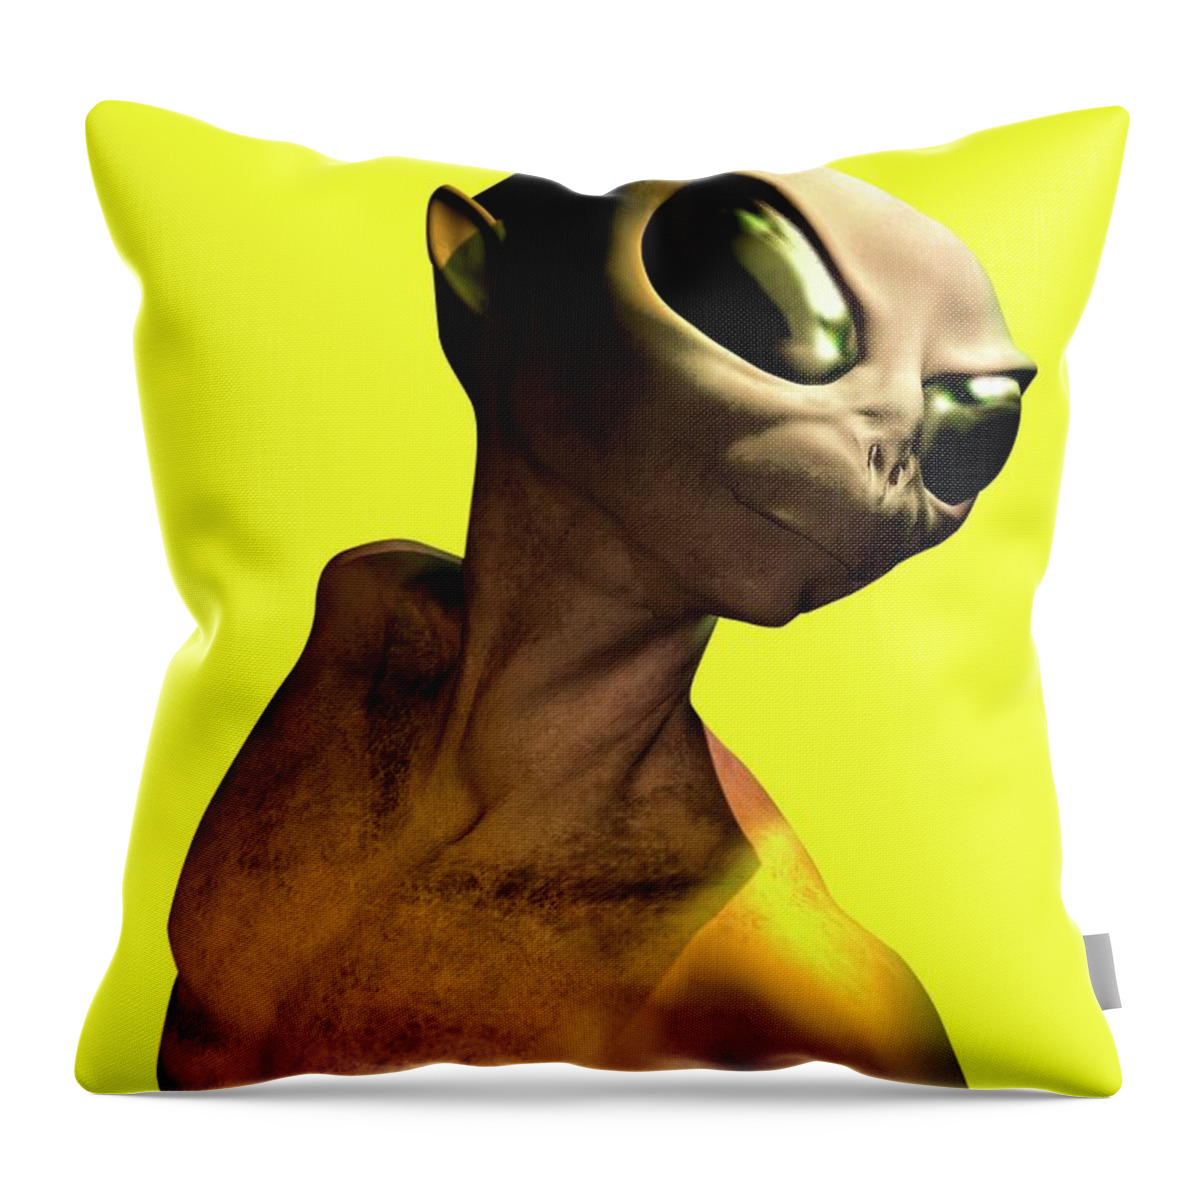 Looking Over Shoulder Throw Pillow featuring the digital art Alien, Artwork #9 by Victor Habbick Visions